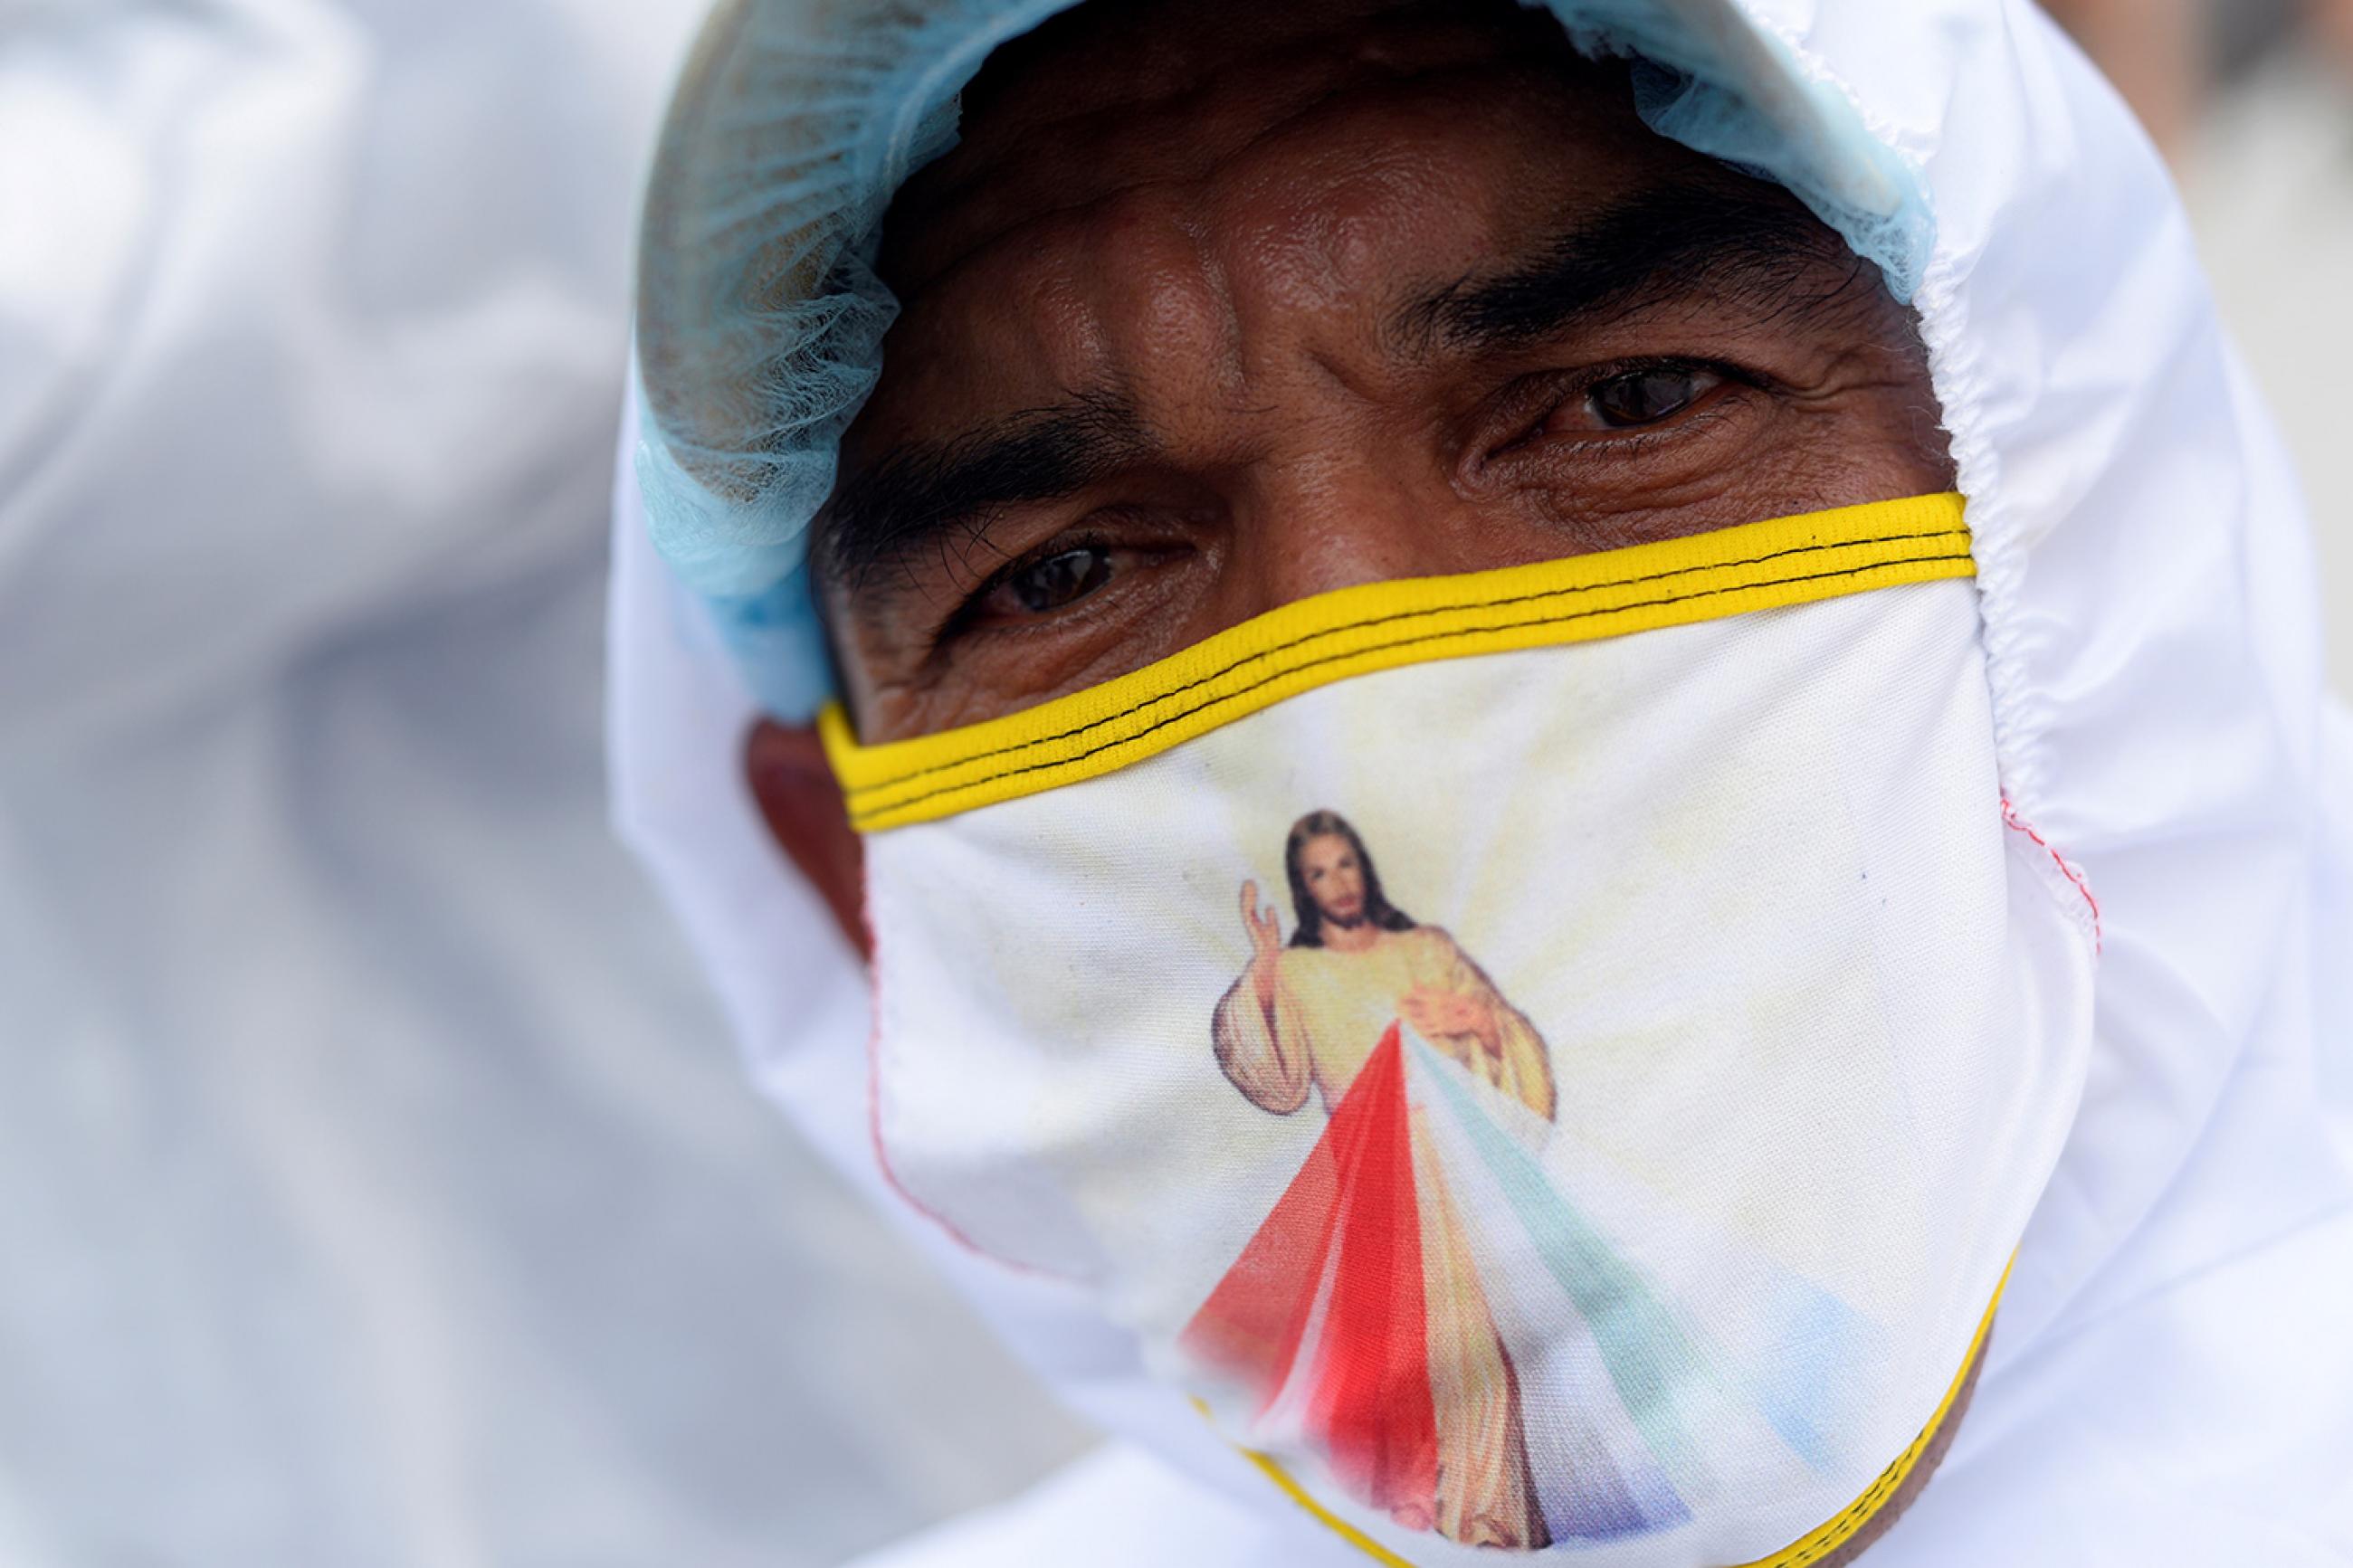 A funeral worker wears a face mask with an illustration of Jesus, outside Los Ceibos hospital amid the outbreak of the coronavirus disease (COVID-19), in Guayaquil, Ecuador, on April 15, 2020. The photo shows the worker in protective head covering and mask. on his mask is an image of Jesus with a rainbow colors on his robe. REUTERS/Santiago Arcos